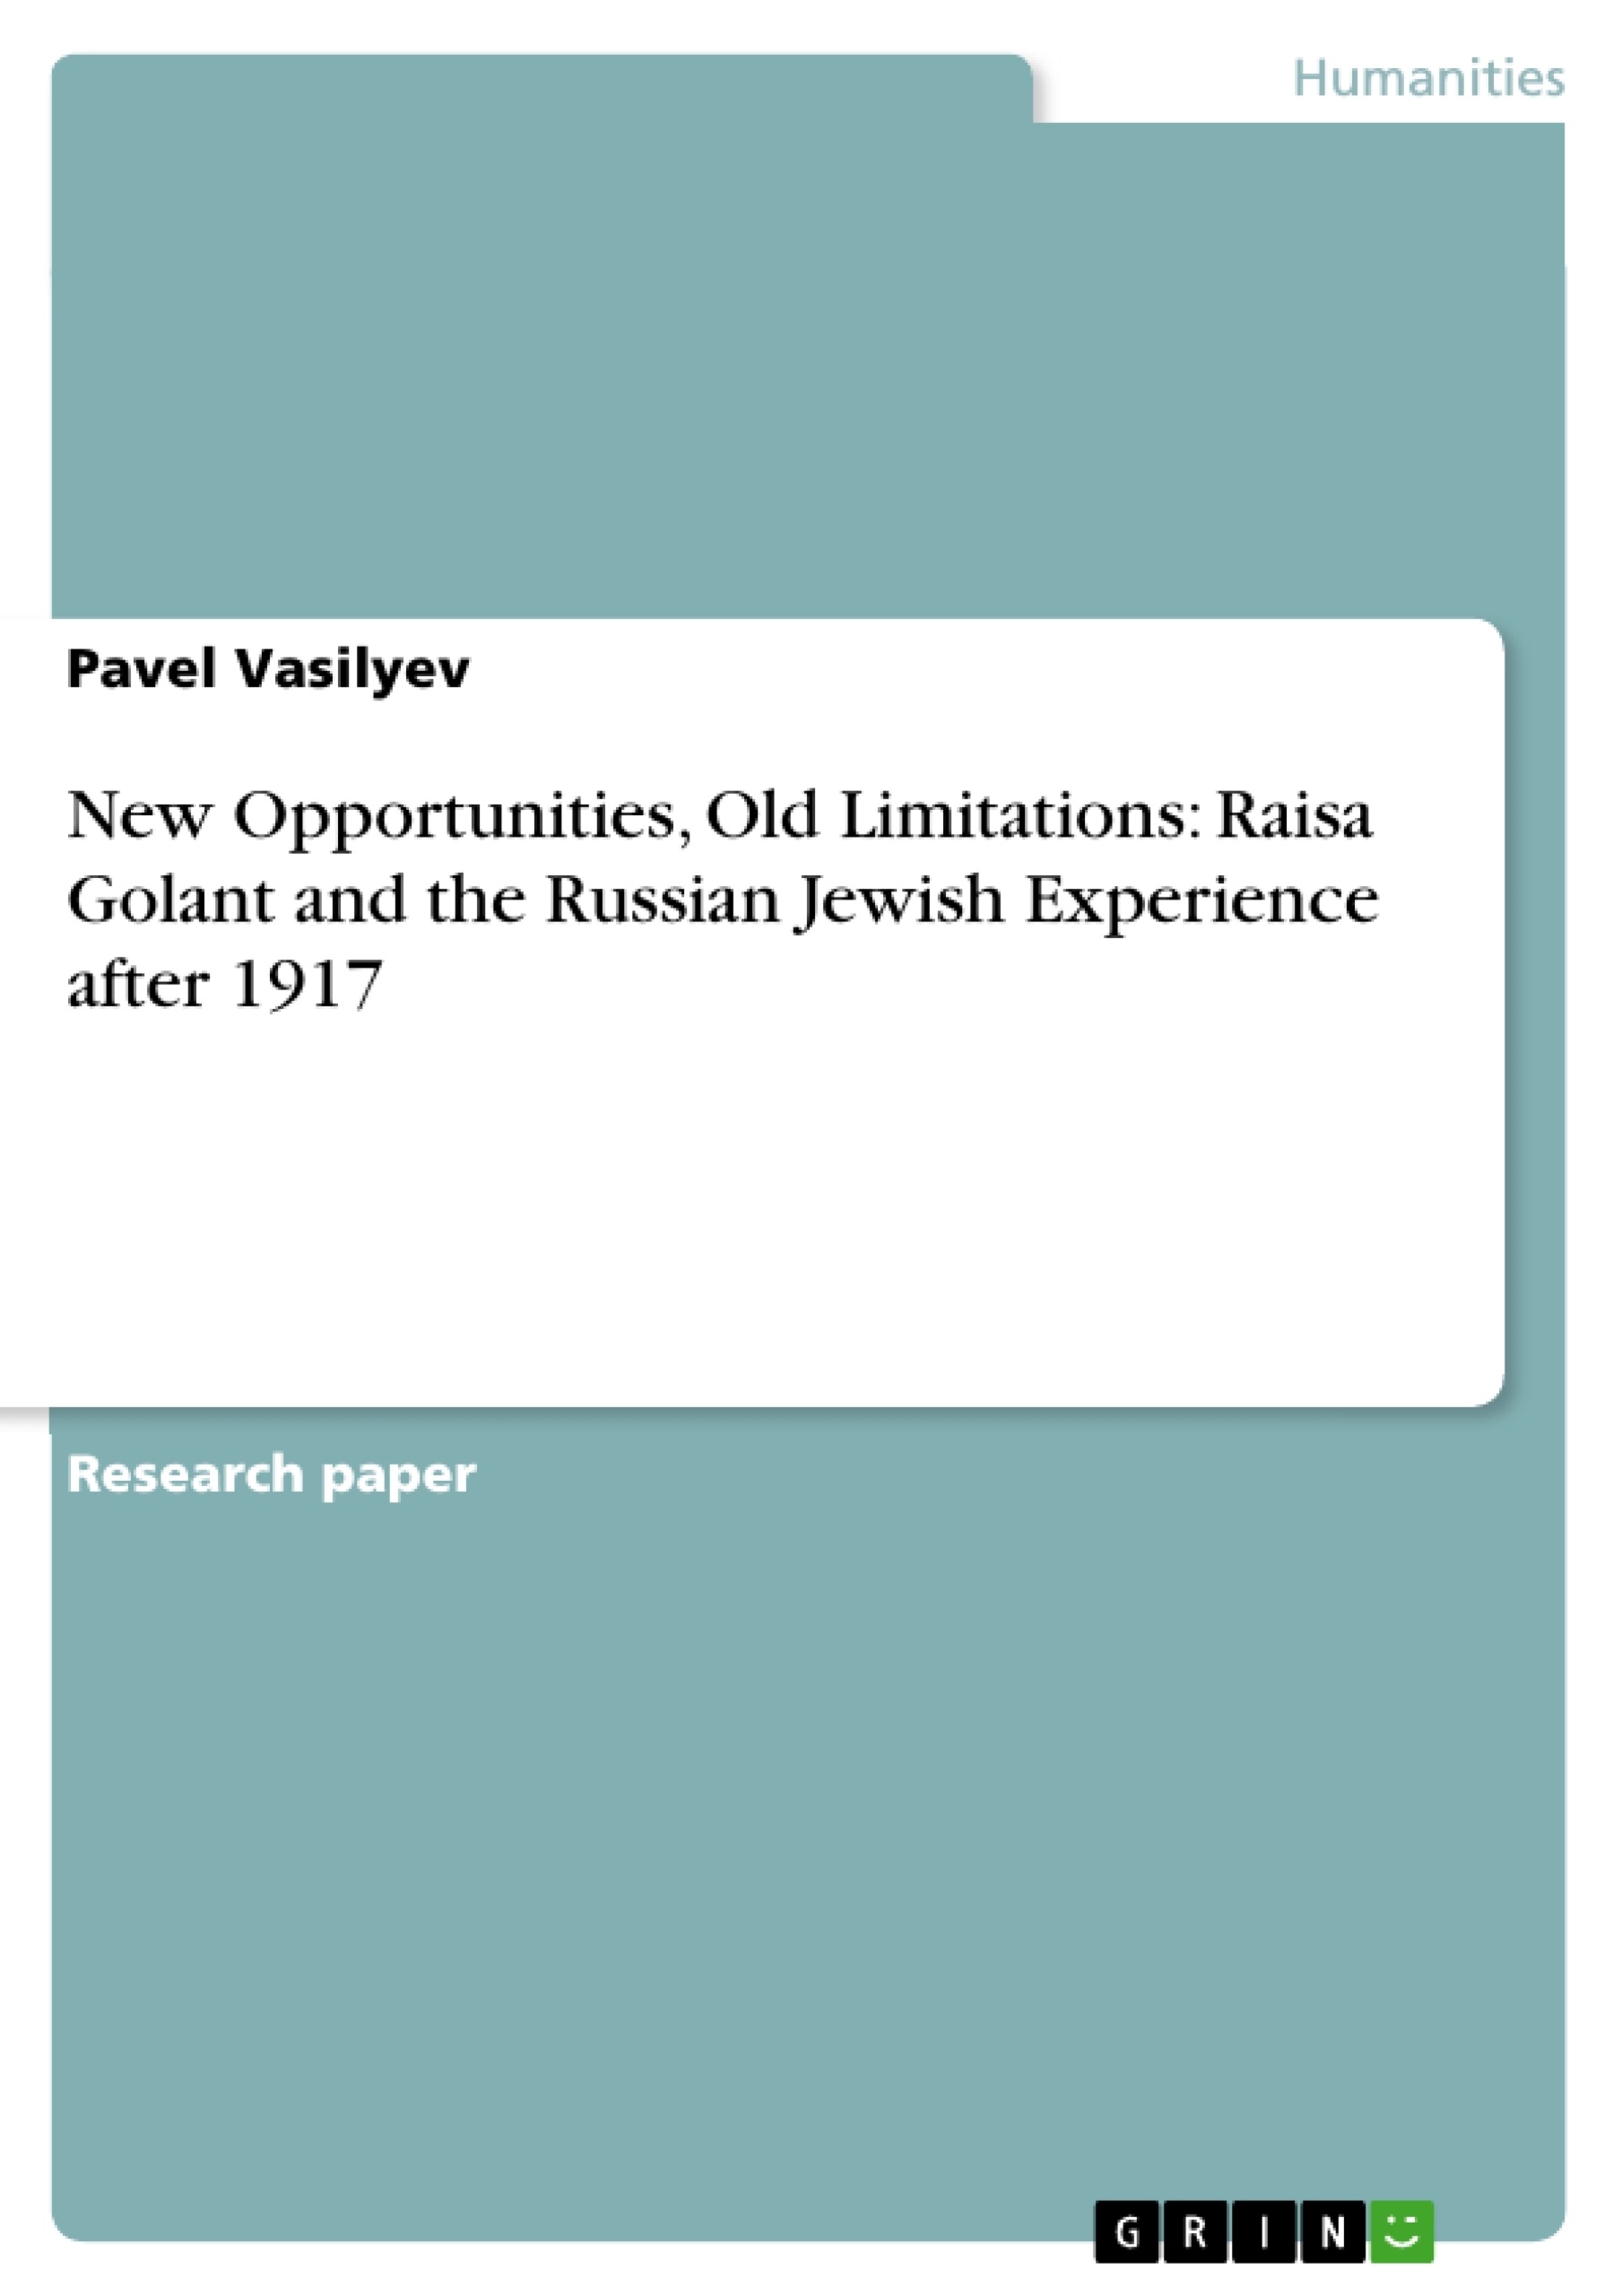 Título: New Opportunities, Old Limitations: Raisa Golant and the Russian Jewish Experience after 1917